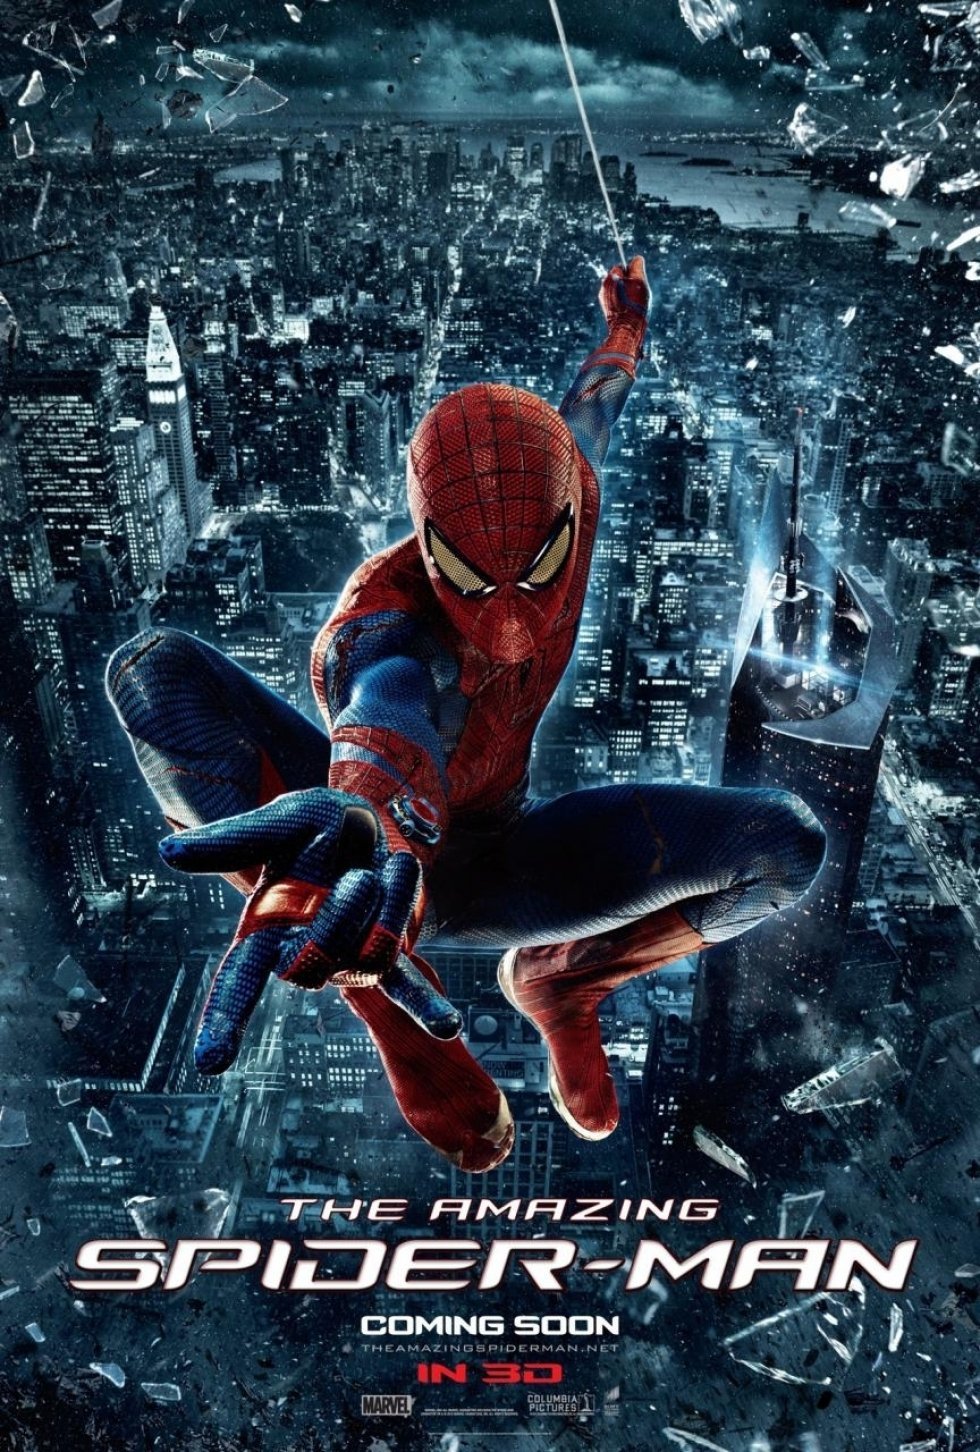  Walt Disney Studios Motion Pictures/Sony Pictures - The Amazing Spider-Man